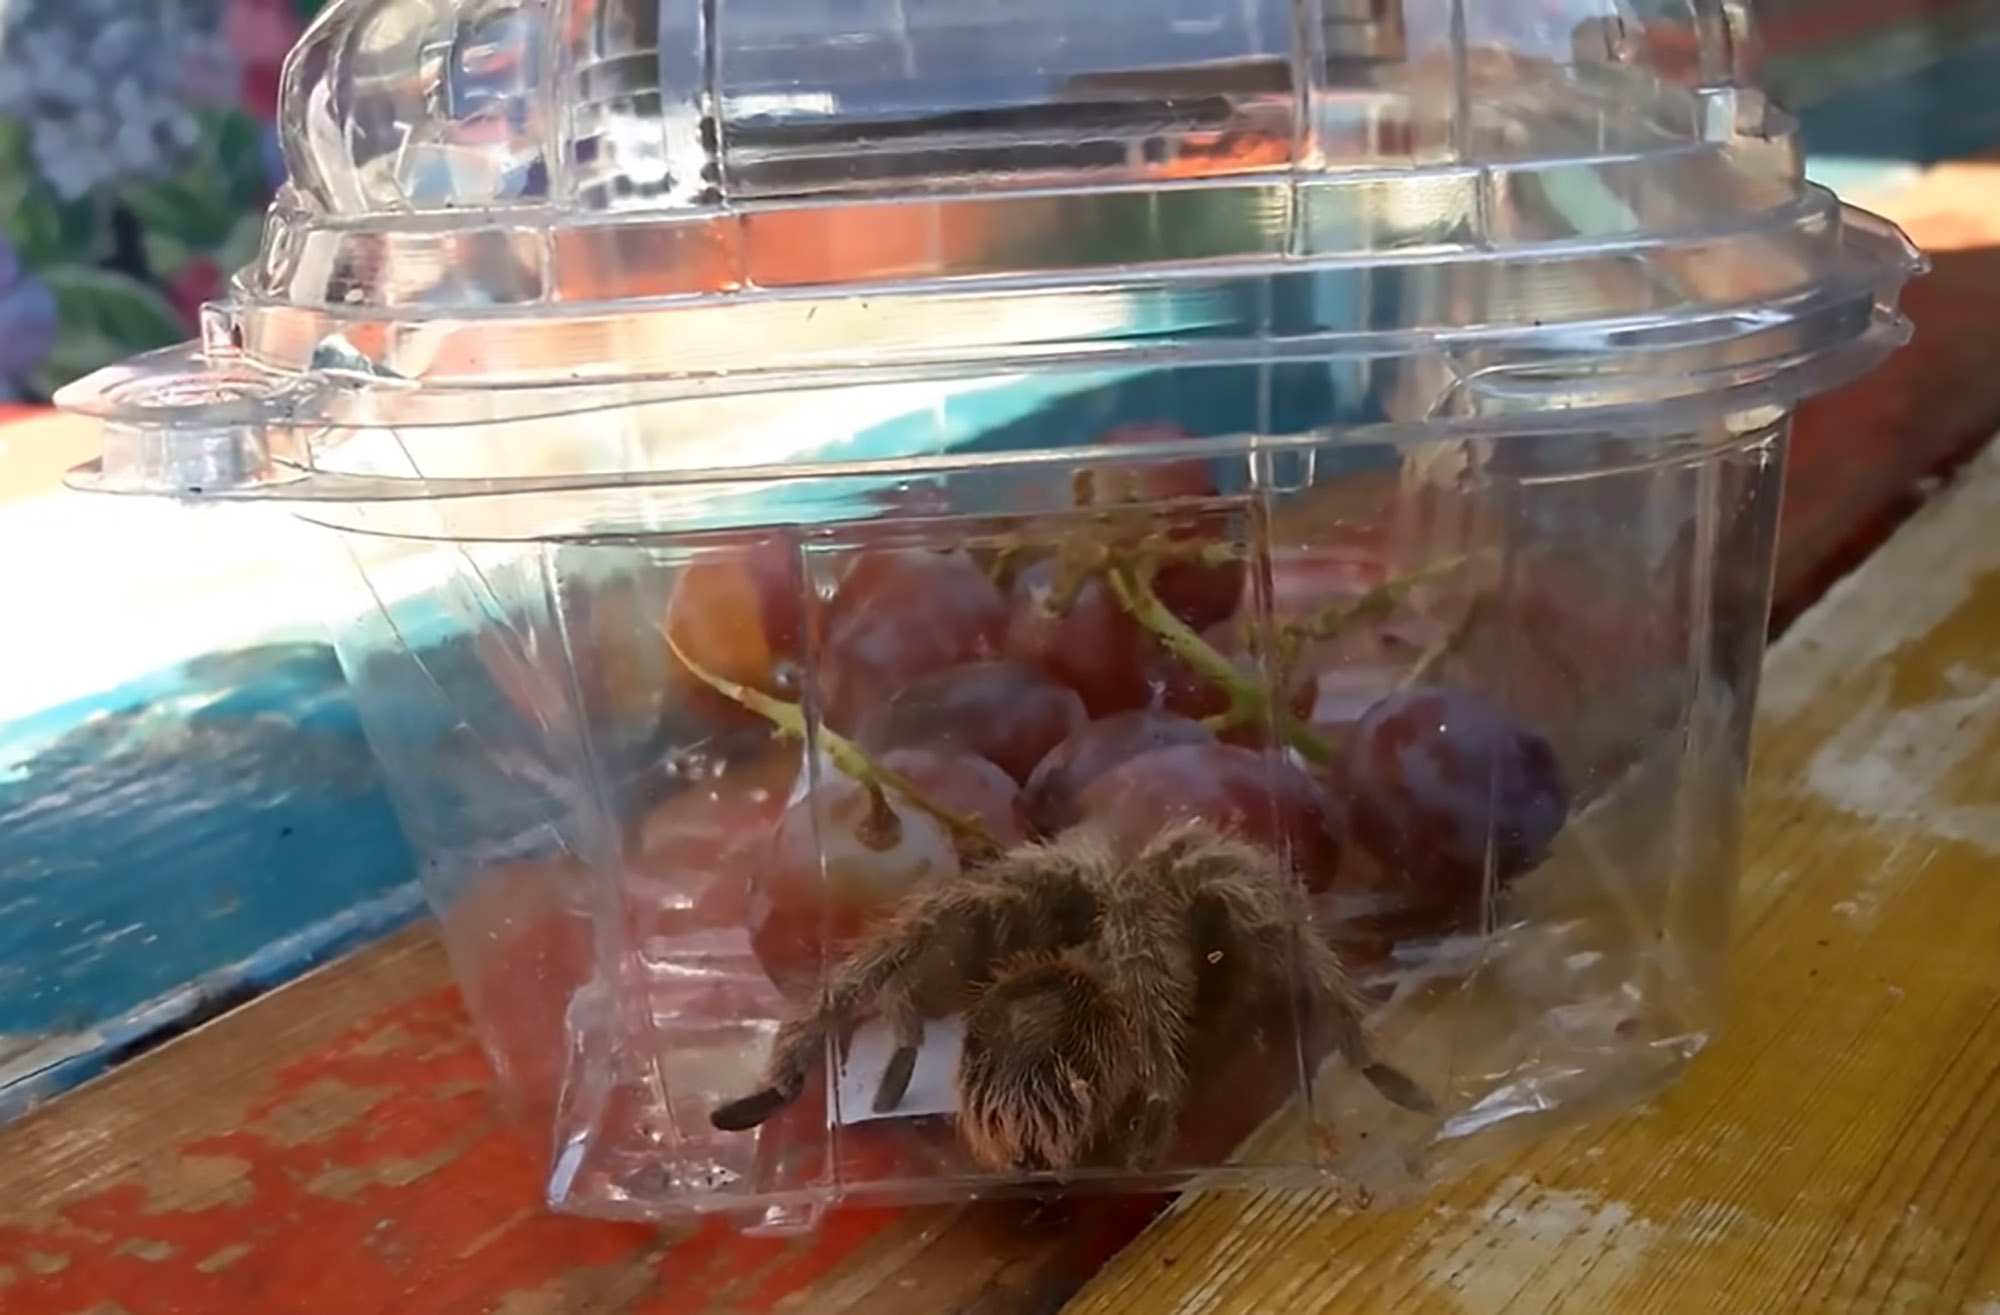 Read more about the article Shock Images Of Tarantula Found In Supermarket Grapes